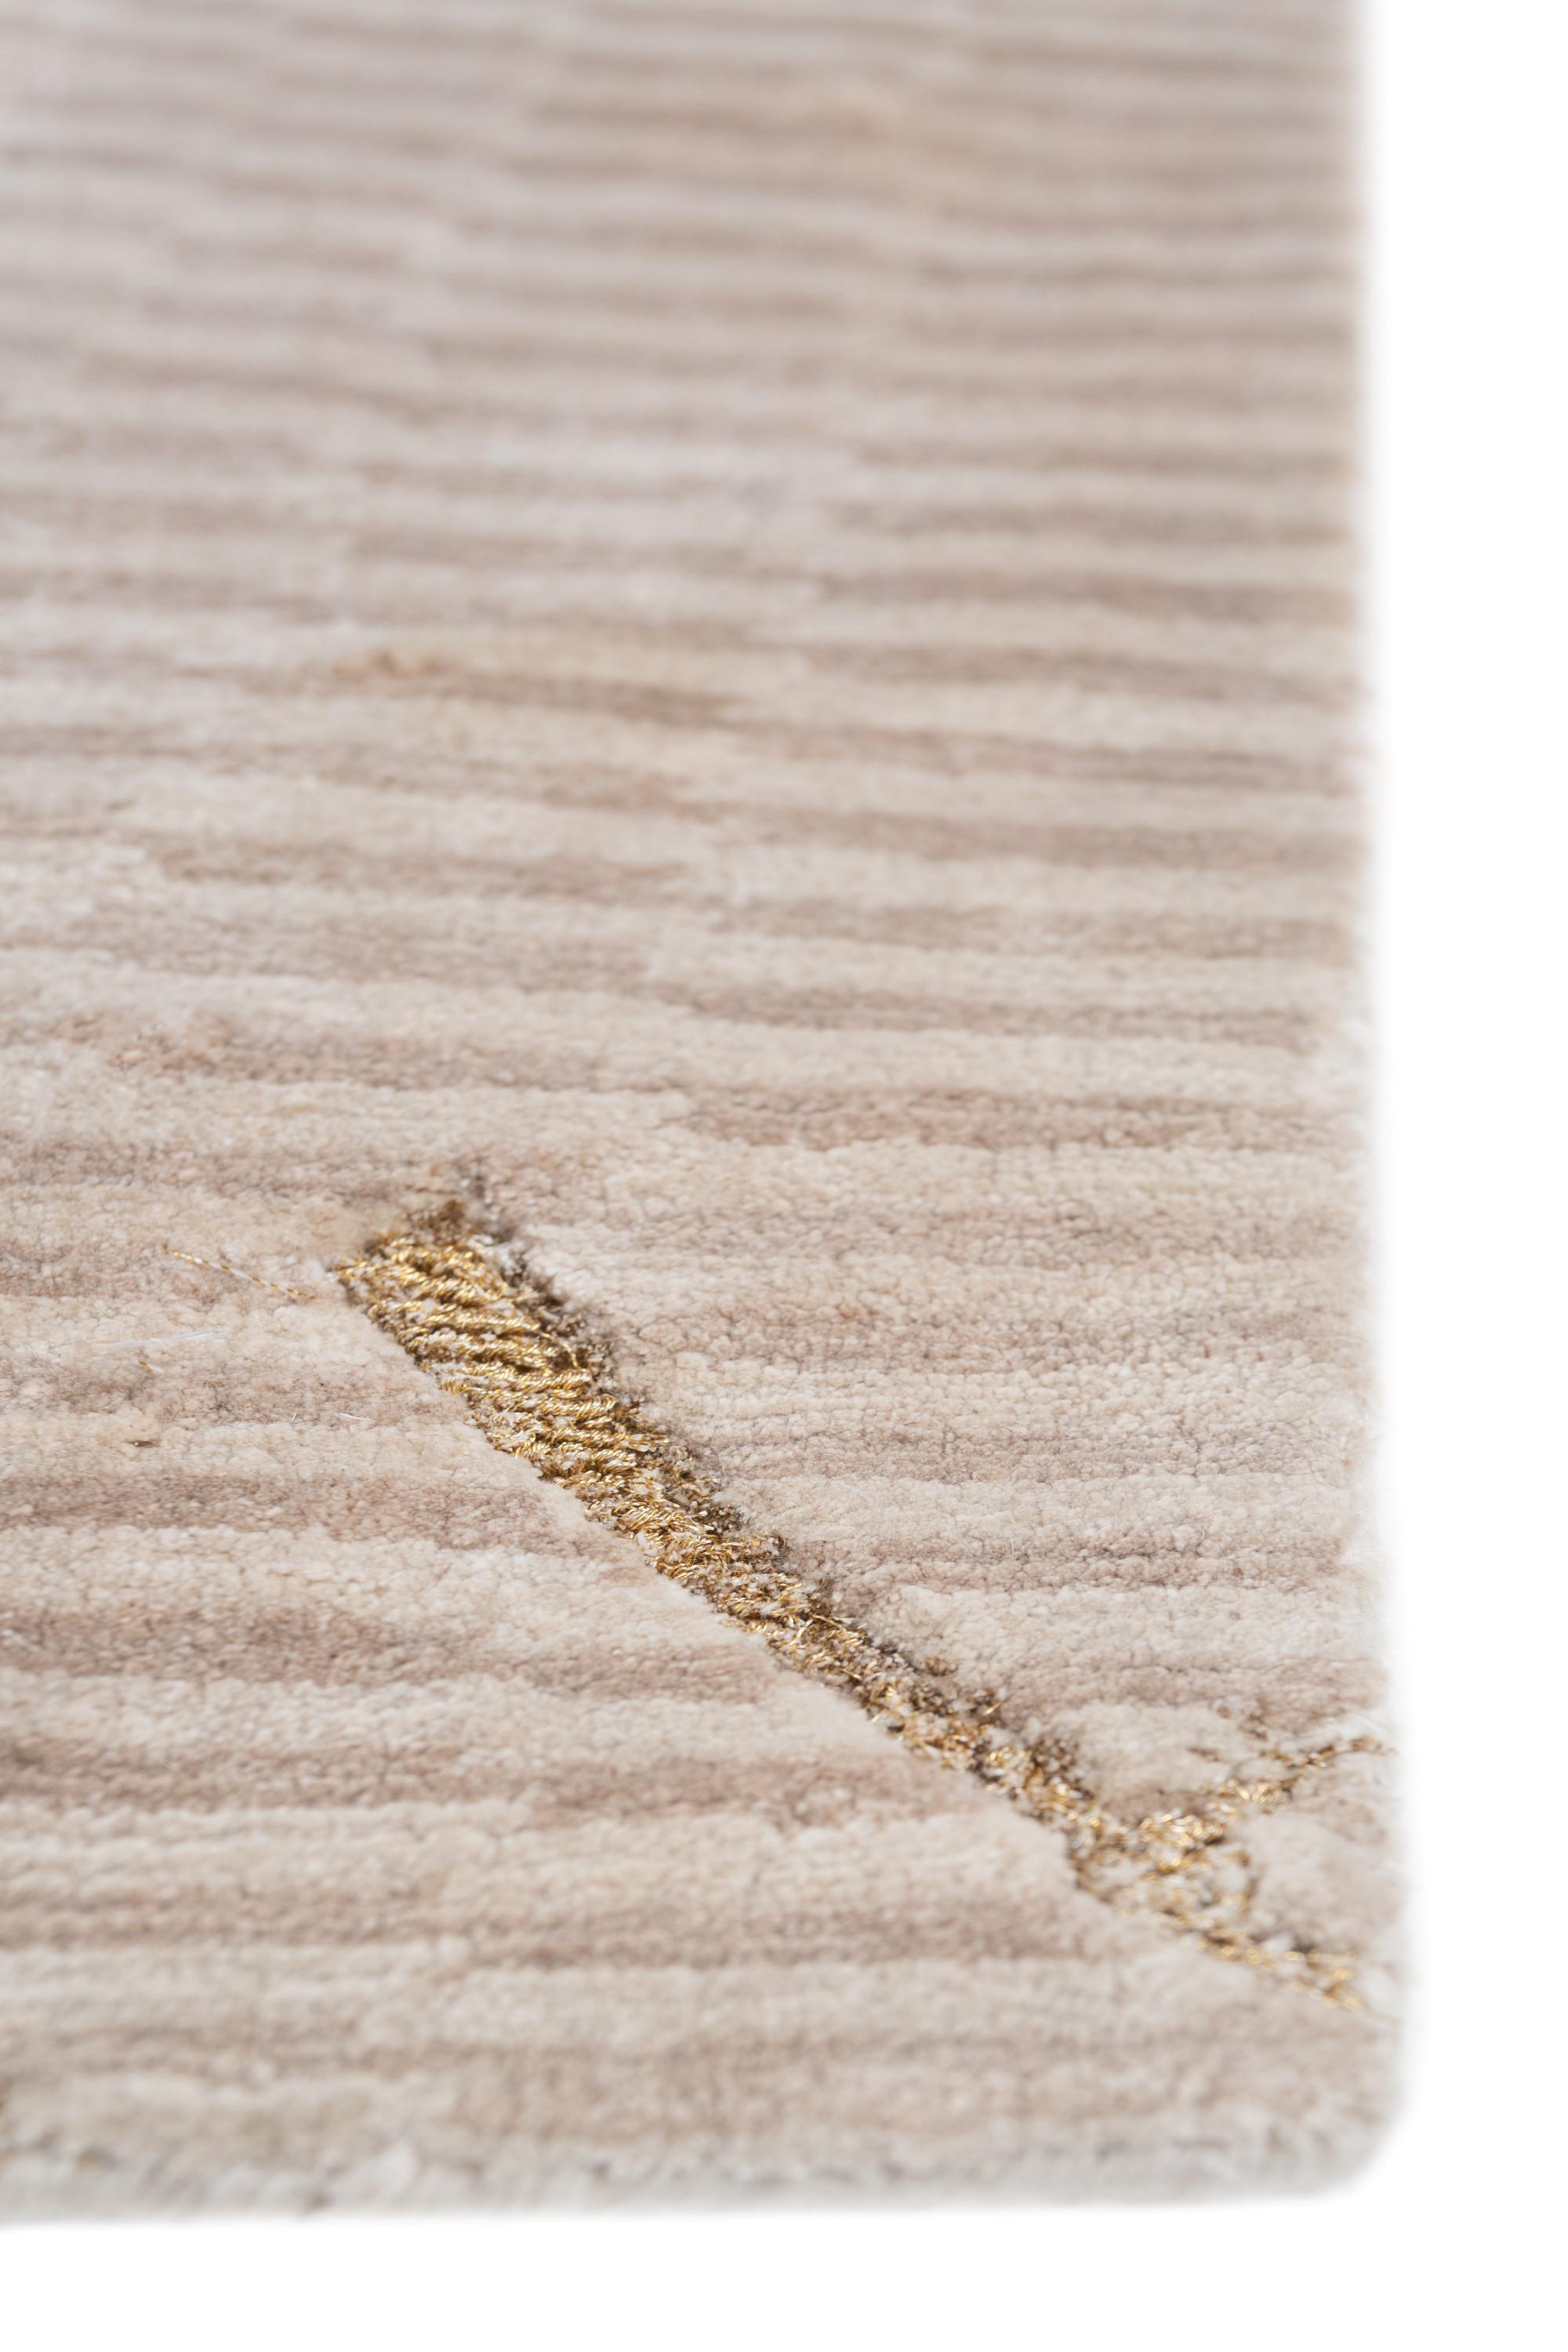 Discover the soulful touch of home with this modern rug , a brand deeply rooted in a commitment to quality and innovation. This exclusive creation, woven with passion from bamboo silk Yarn, introduces a serene tone-on-tone palette in the calming